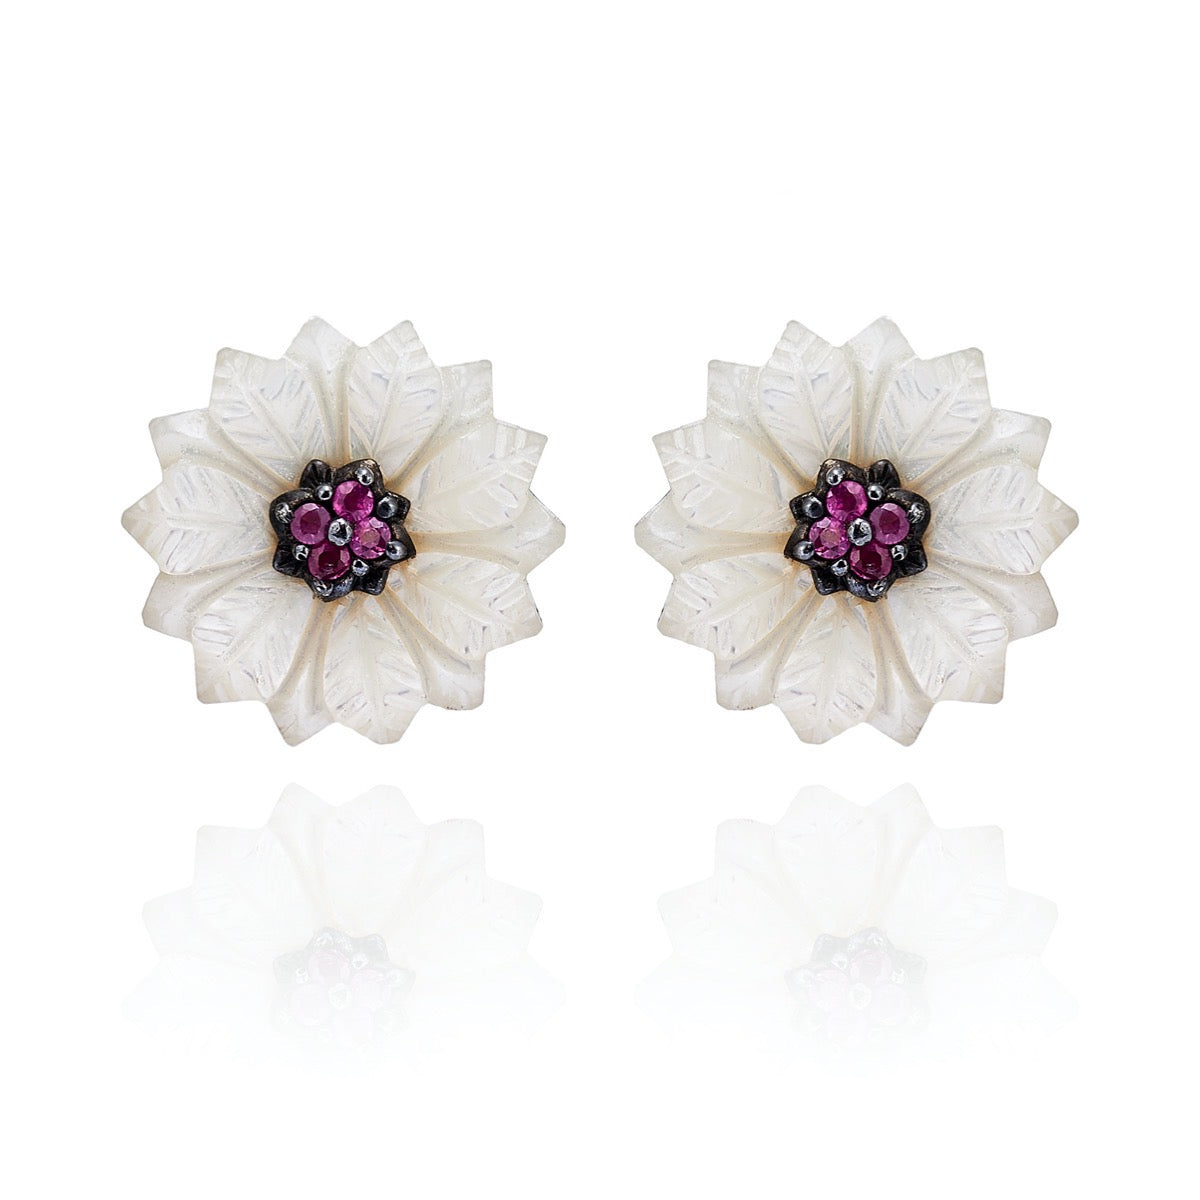 Hand Carved Mother of Pearl Flower Stud Earring